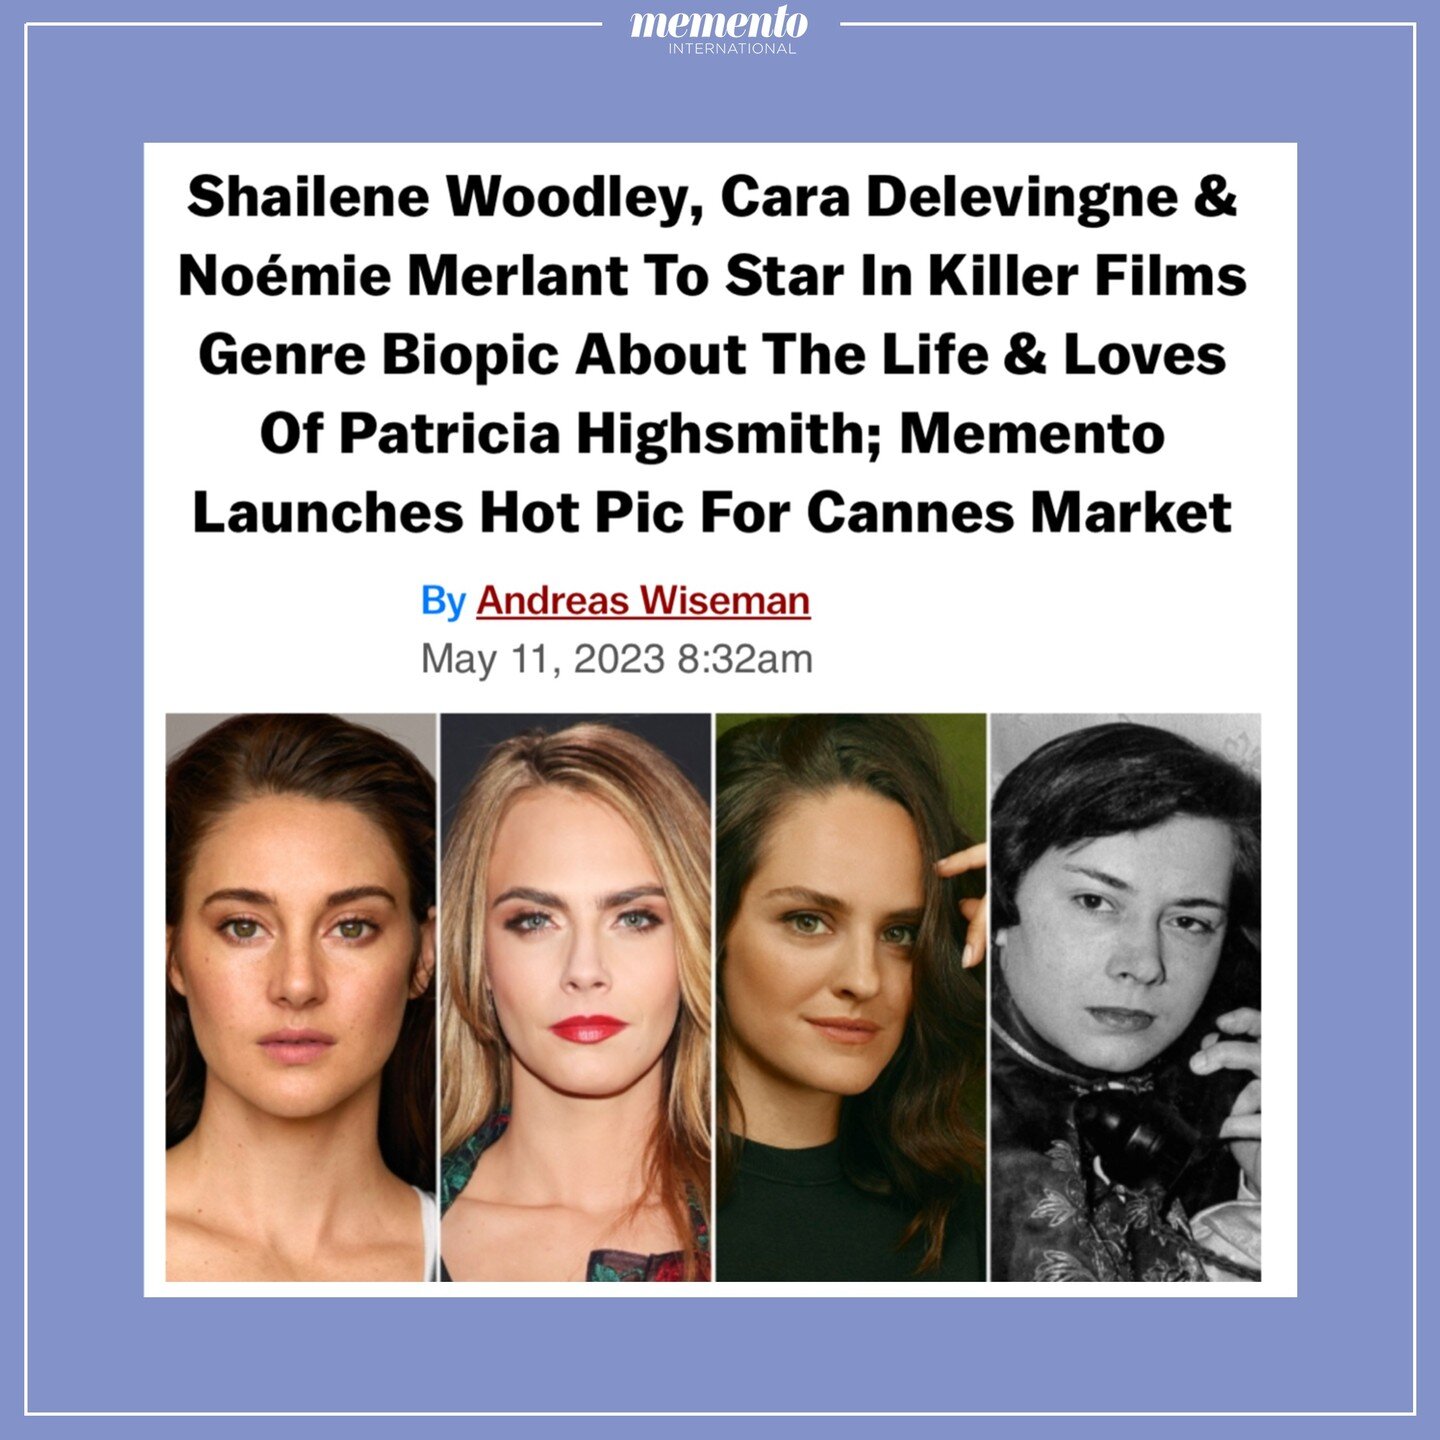 And that's two!

We will be launching THE MURDEROUS MISS HIGHSMITH by Alexandra Pechman starring Shaylene Woodley, Cara Delevingne and No&eacute;mie Merlant this year in Cannes! 🔪

The film will reimagine the author&rsquo;s life as a horror movie, f